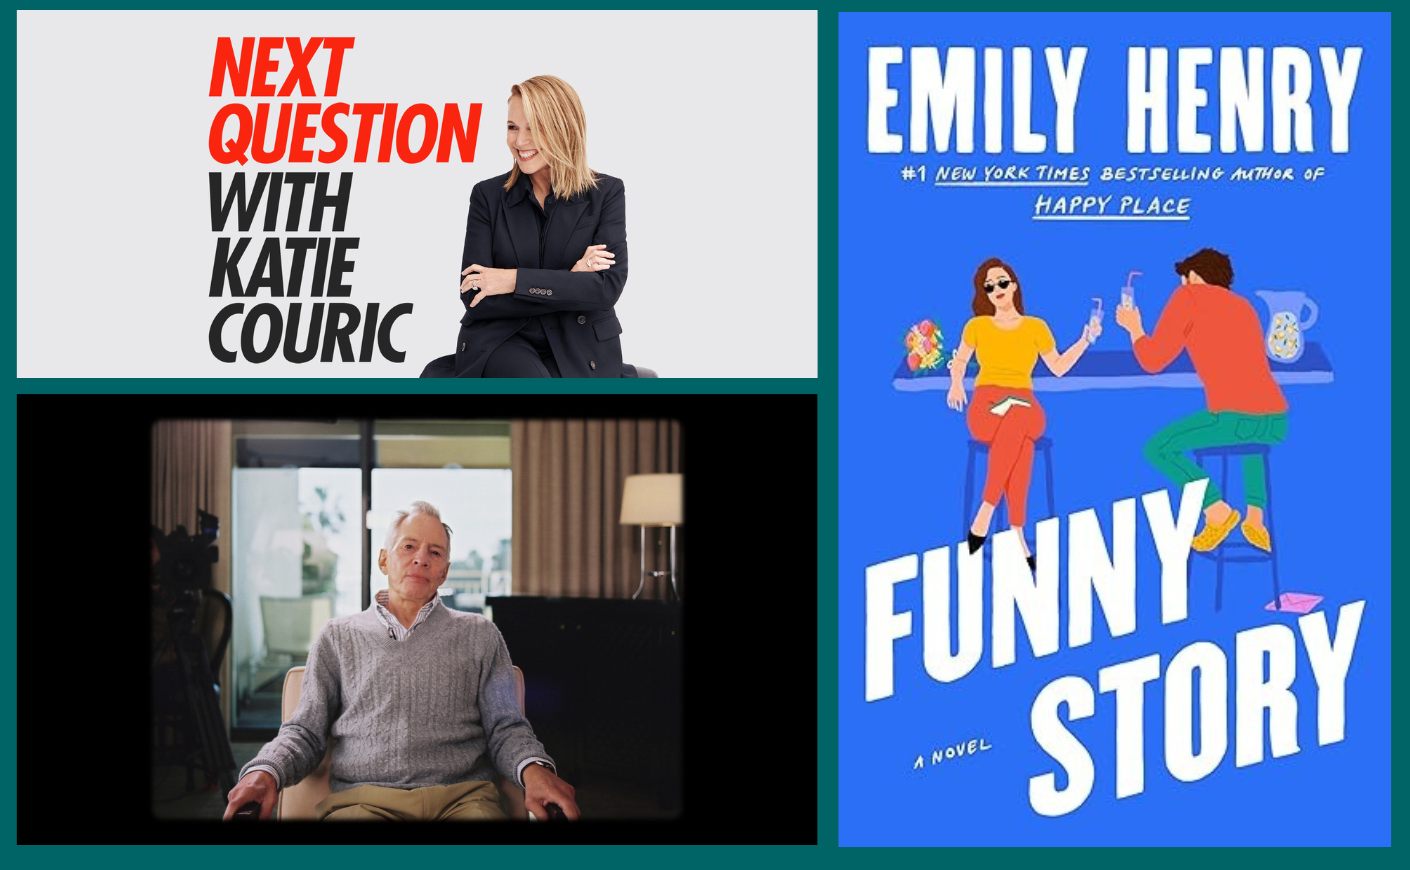 Next Question with Katie Couric, Funny Story by Emily Henry book cover, Robert Durst